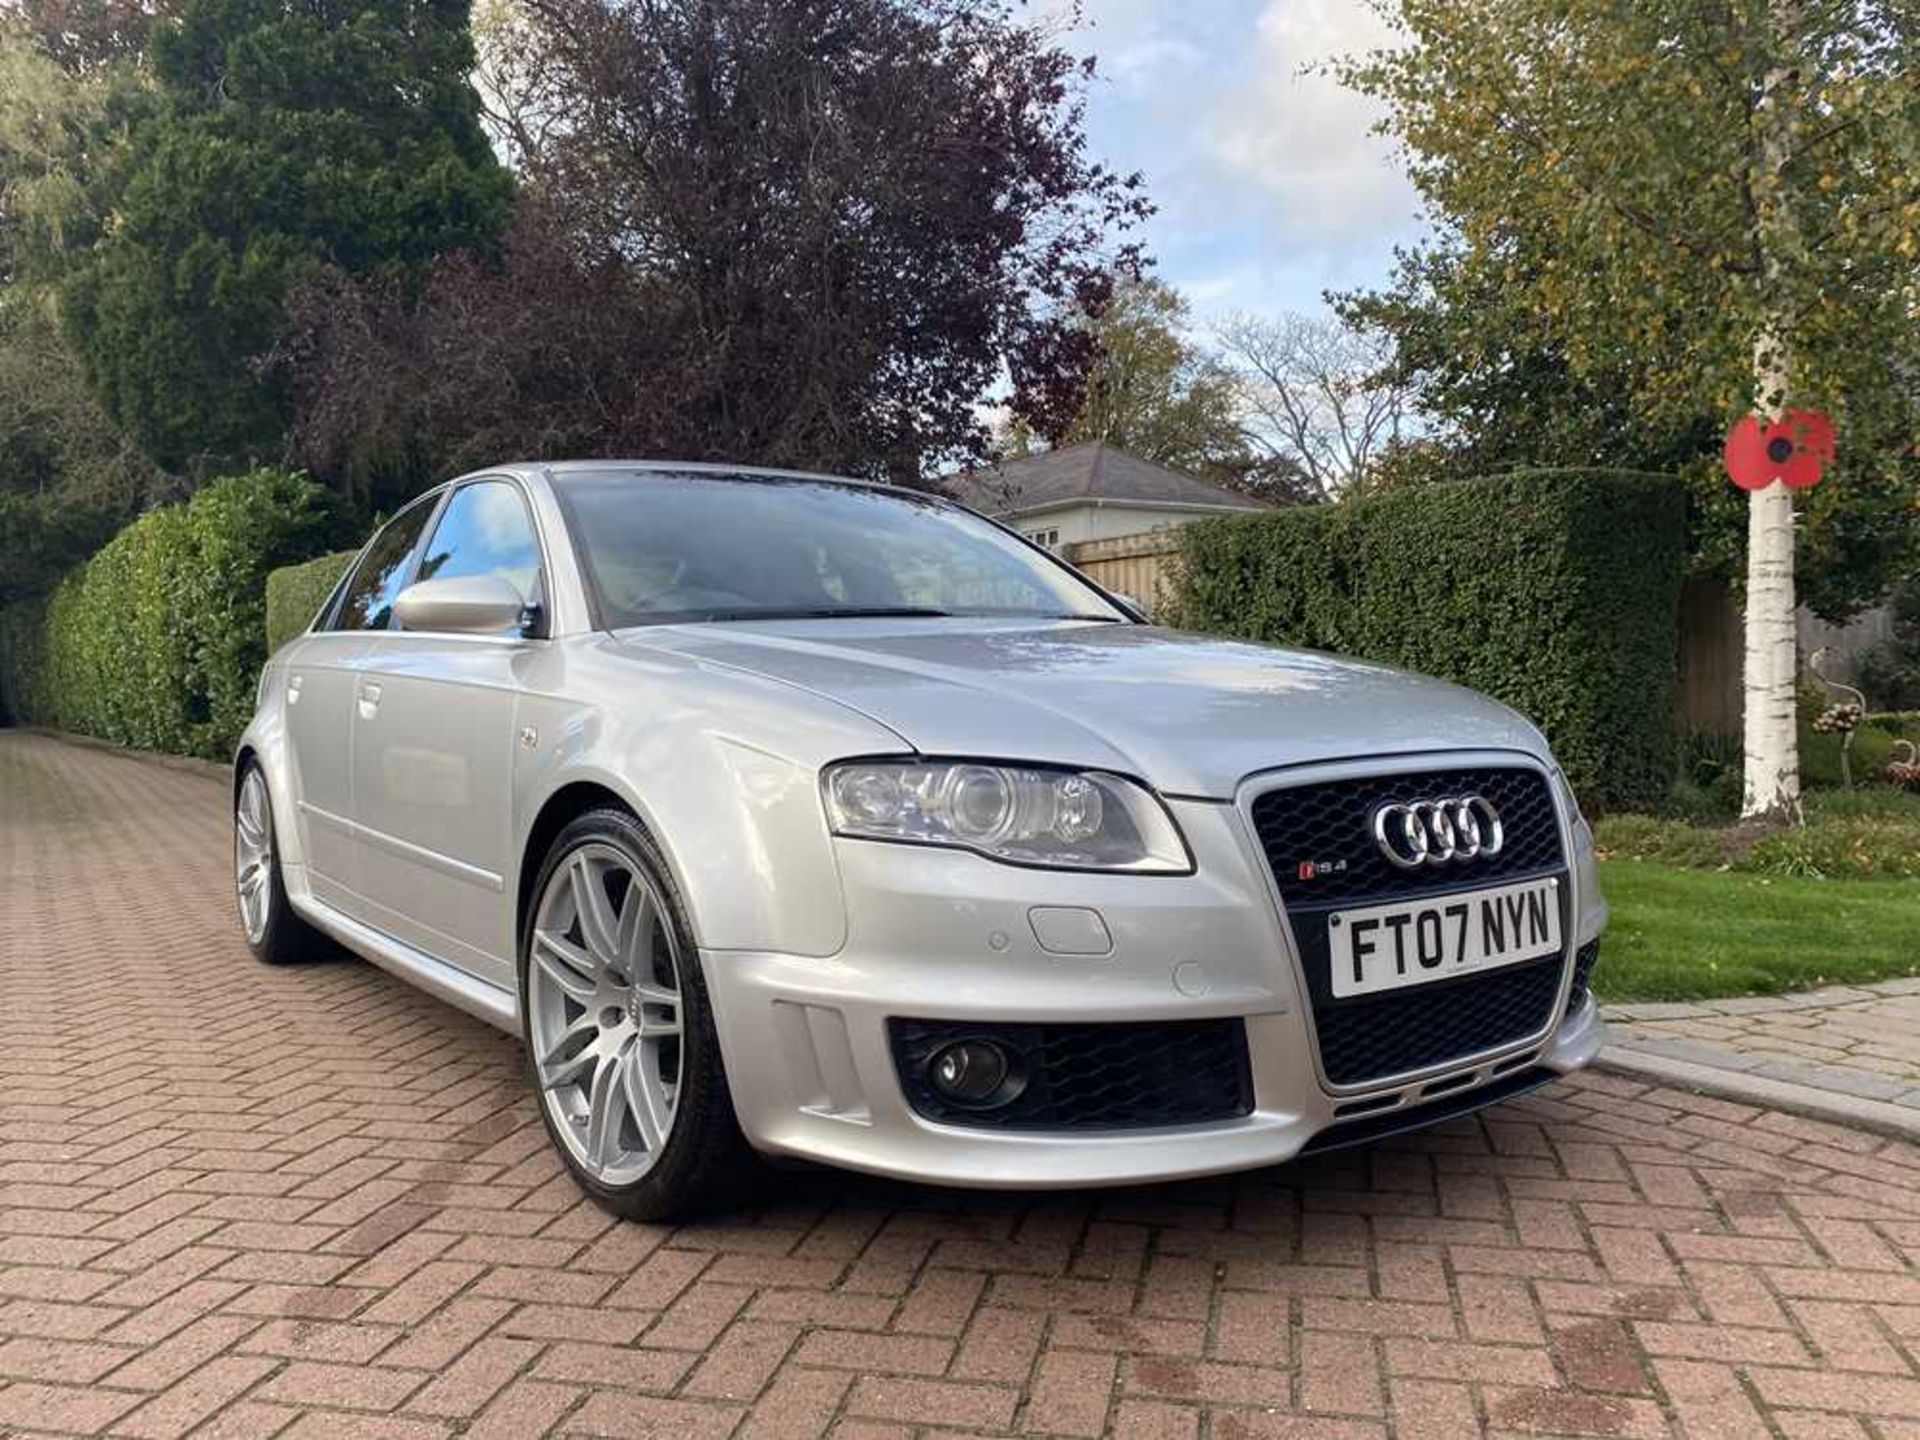 2007 Audi RS4 Saloon One owner and just c.60,000 miles from new - Image 2 of 86